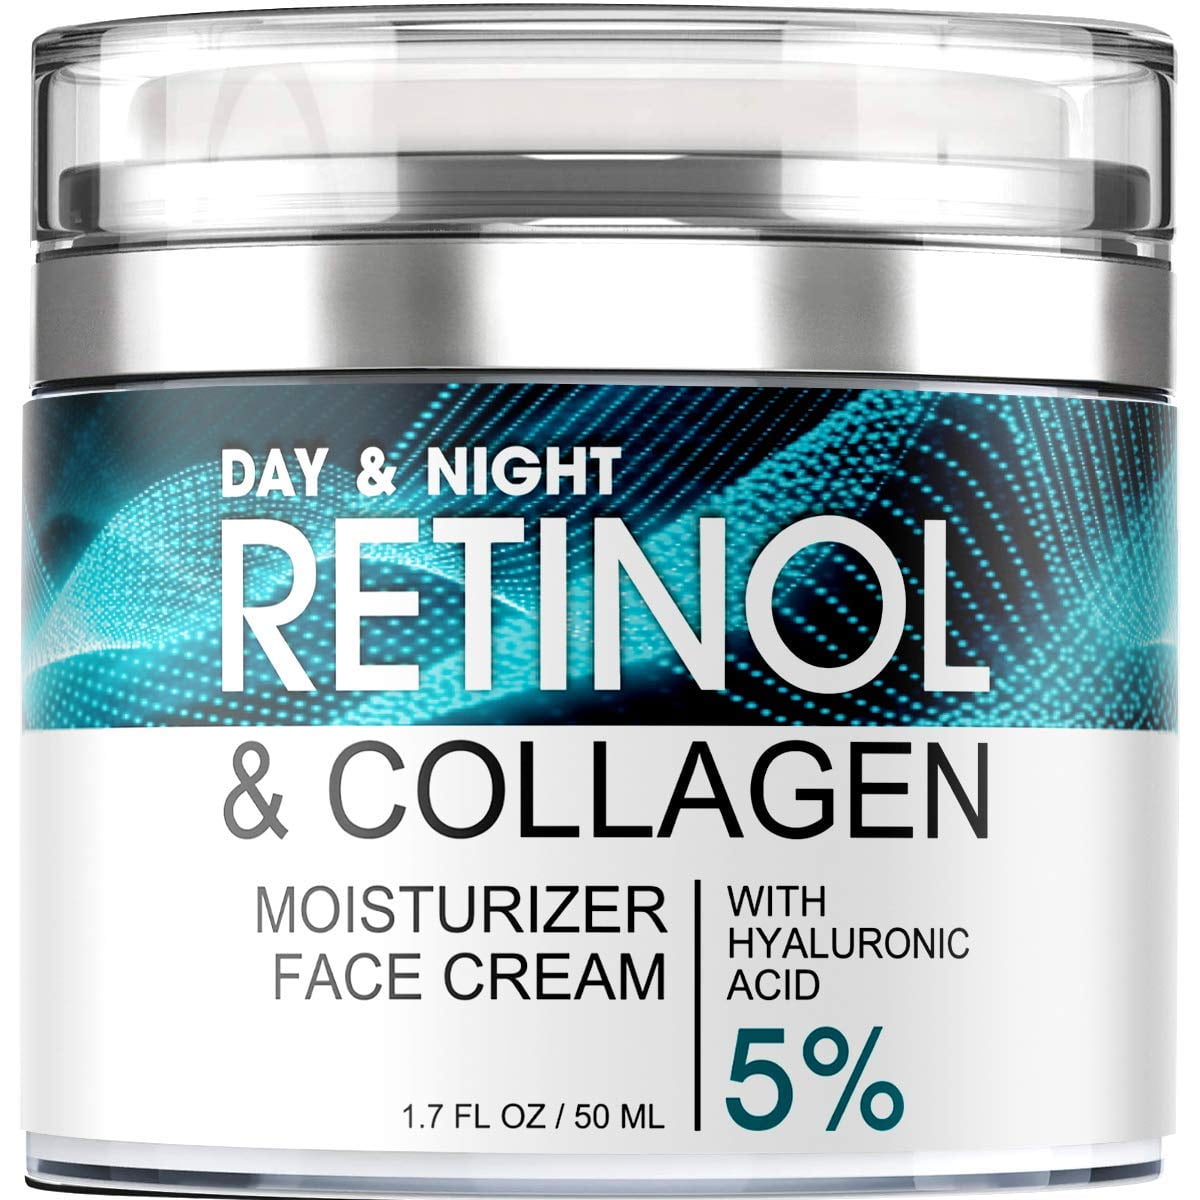 Retinol Cream for Face – Facial Hyaluronic Acid and Collagen – Hydrating Face Lotion for Women and Men – Day and Night Anti-Aging Moisturizing Cream – For All Types - Walmart.com